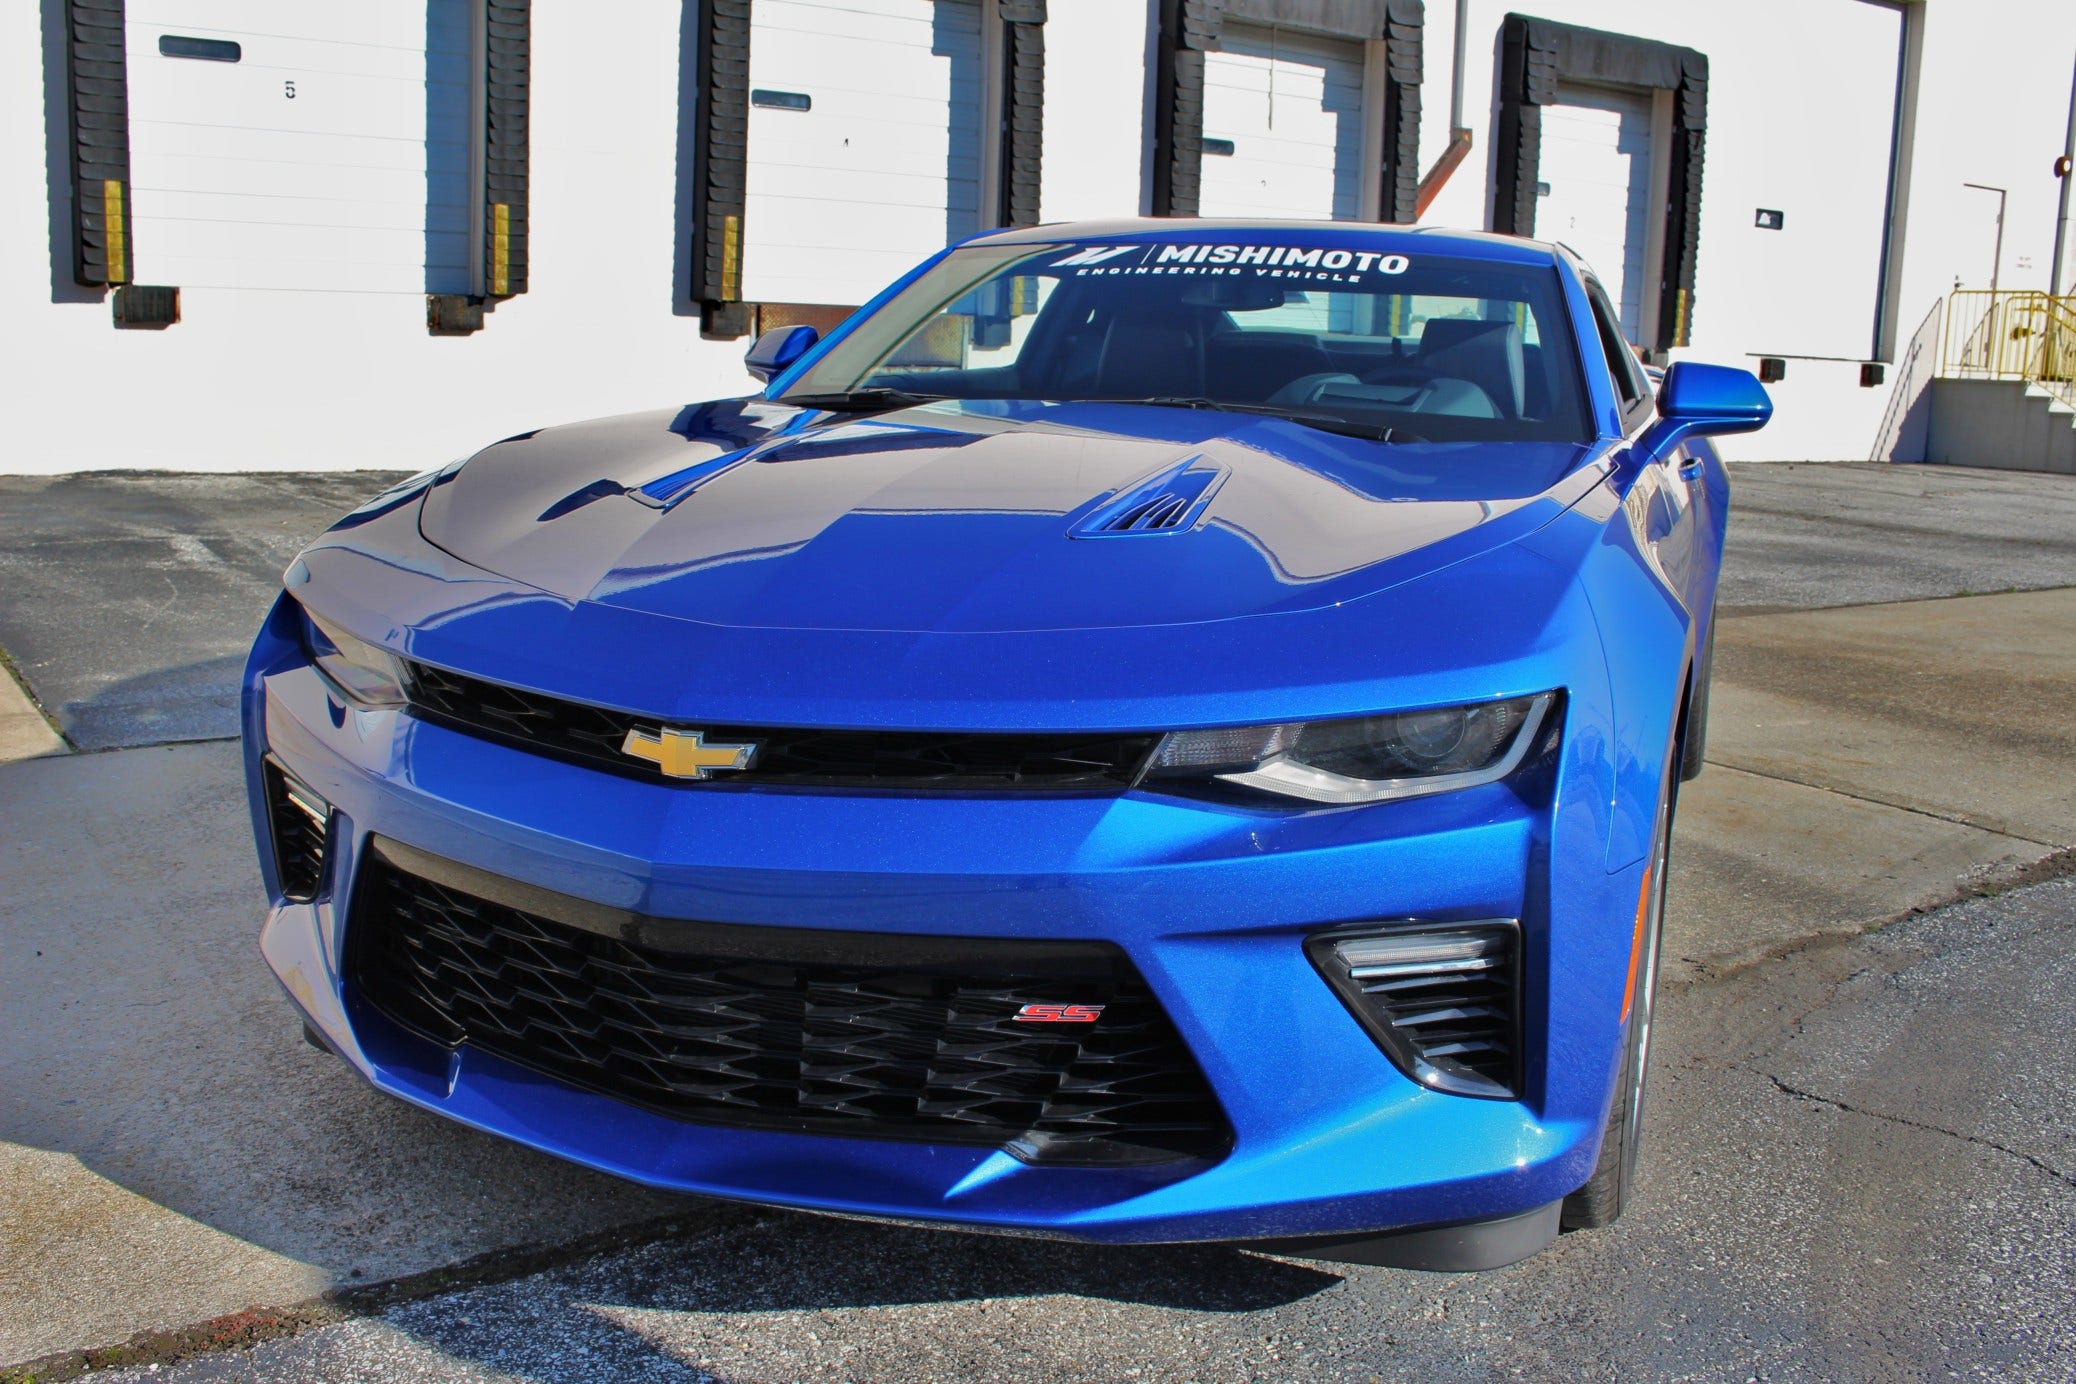 2016 Camaro SS Video Review Series, Part 1: Introduction & Initial Impressions